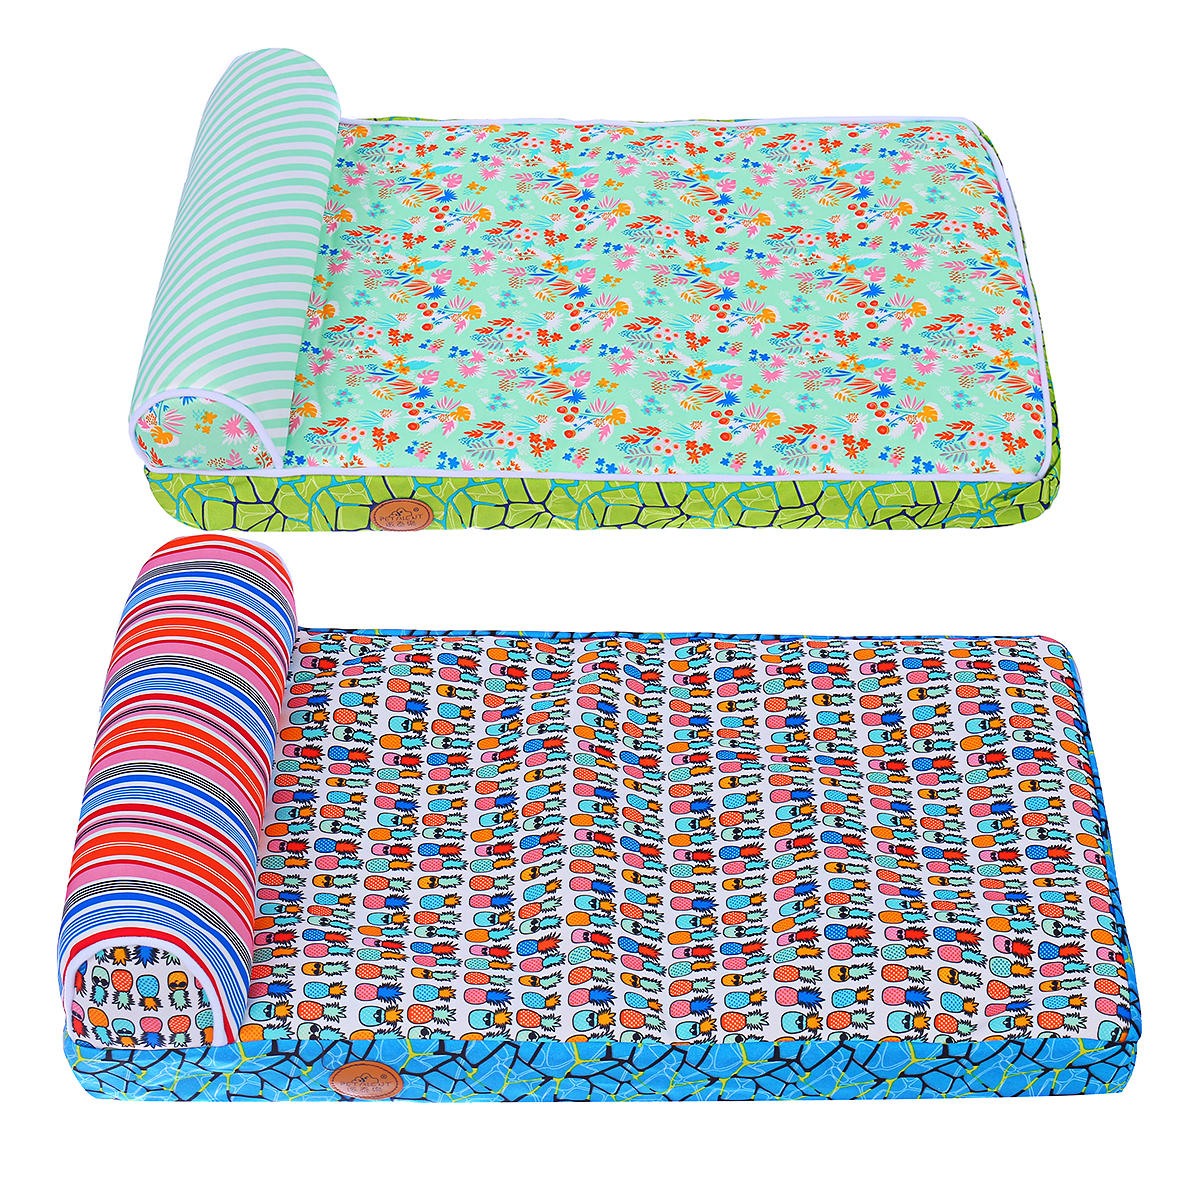 Sofa-Shape-Large-Dog-Bed-Multicolor-Soft-Waterproof-Pet-Sleeping-Bed-Mat-House-Kennels-1479299-7